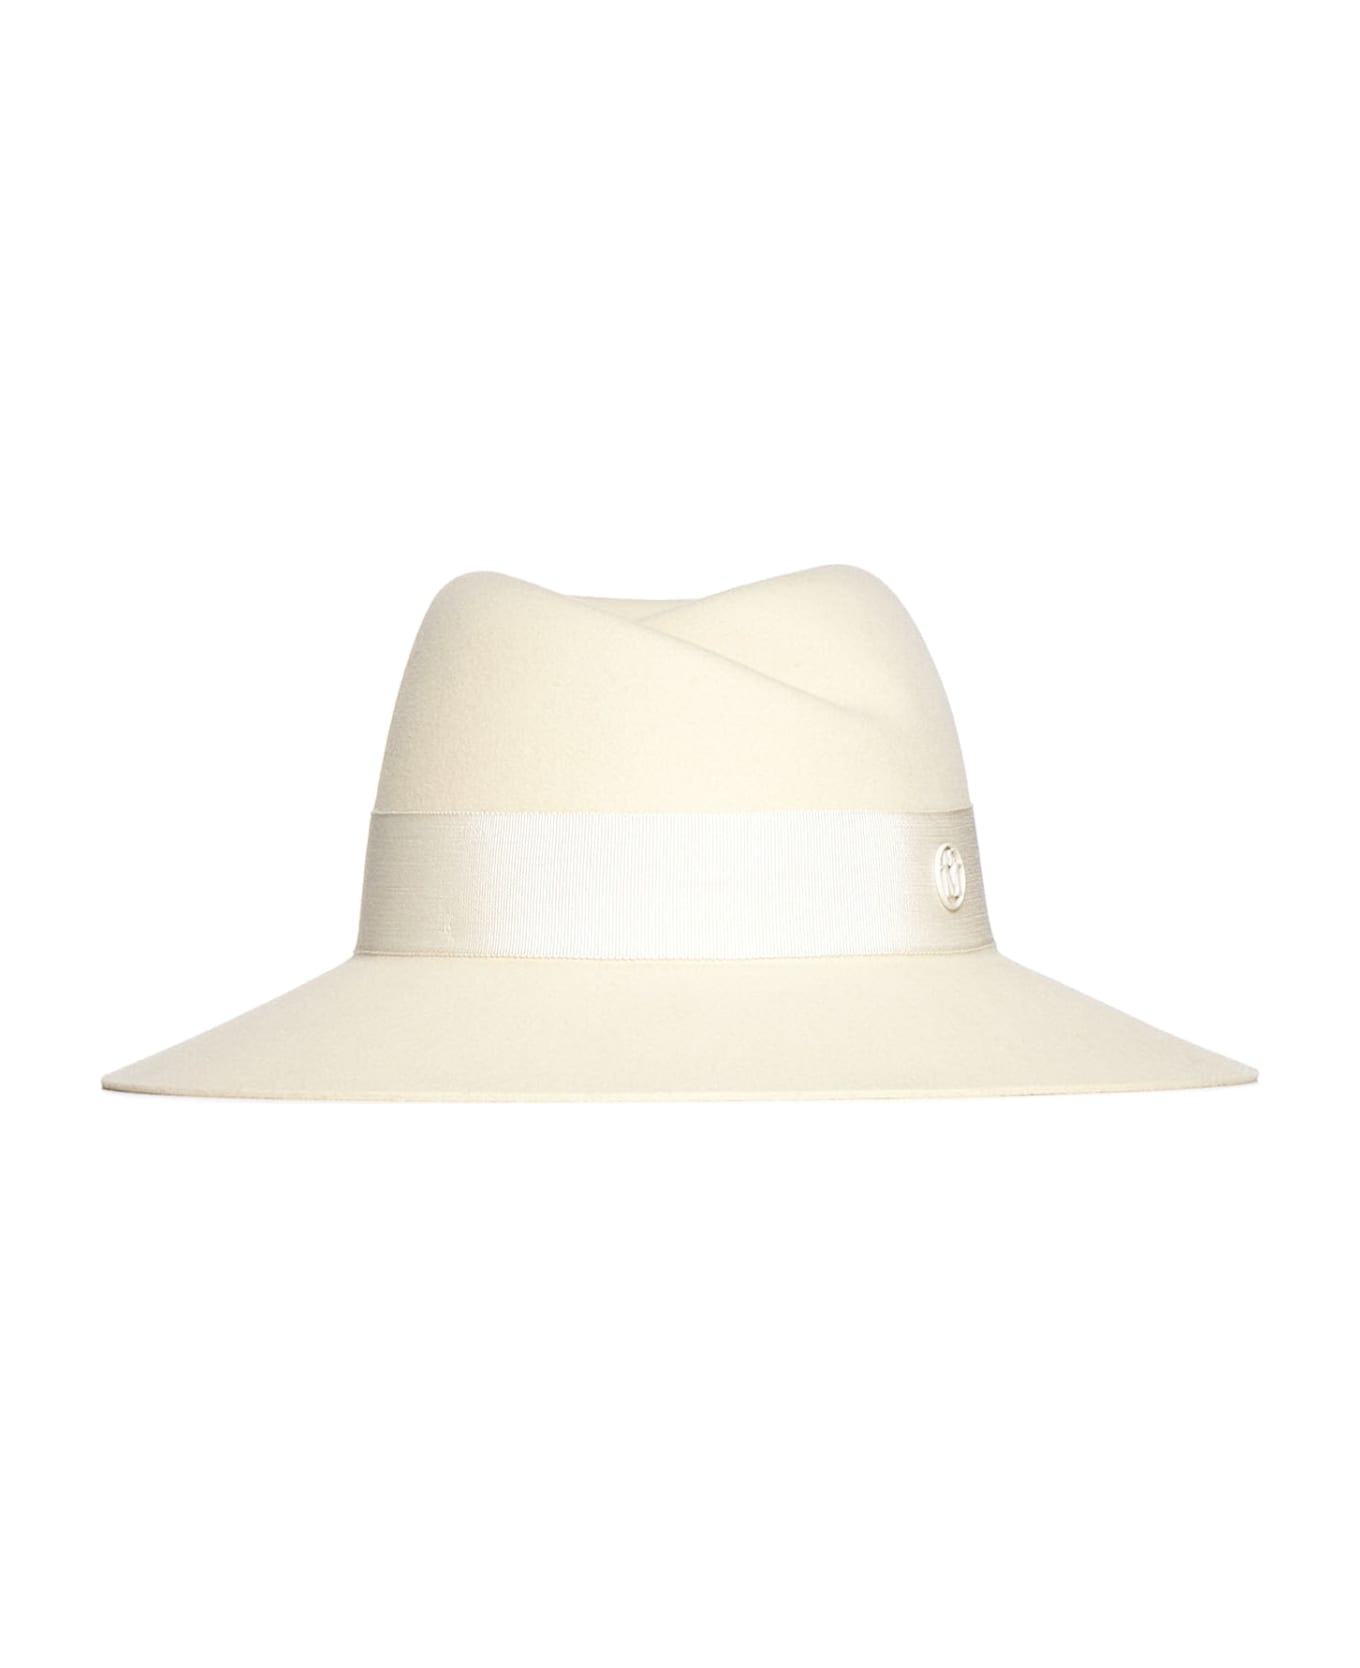 Maison Michel Hat - Seed pearl